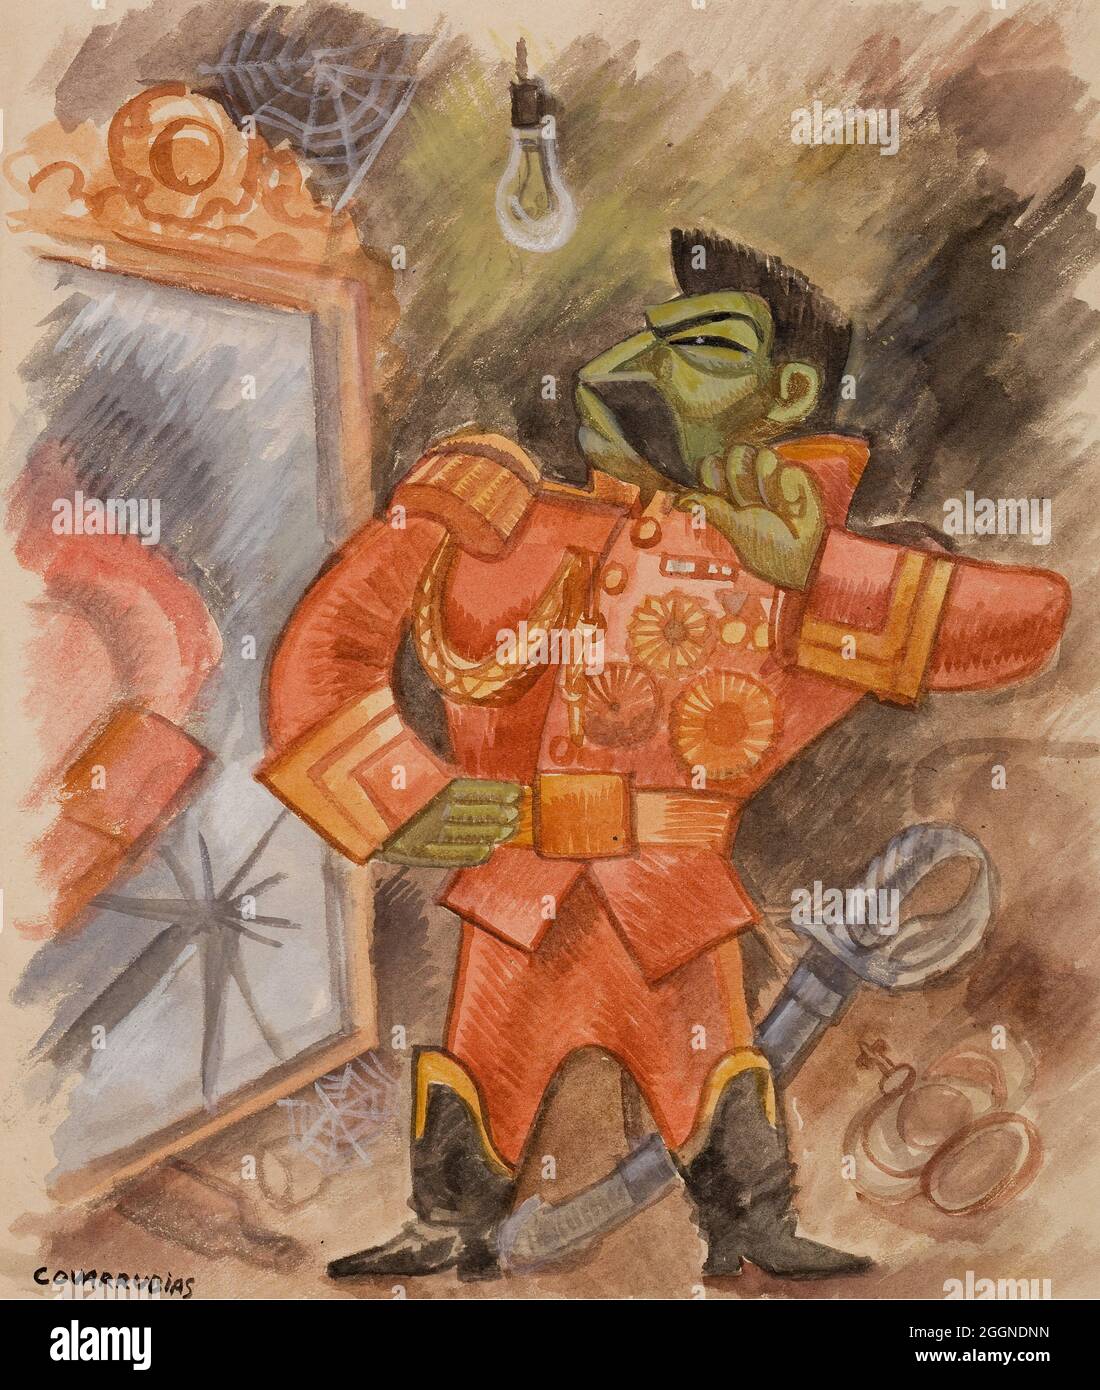 Stalin. Museum: PRIVATE COLLECTION. Author: MIGUEL COVARRUBIAS. Stock Photo